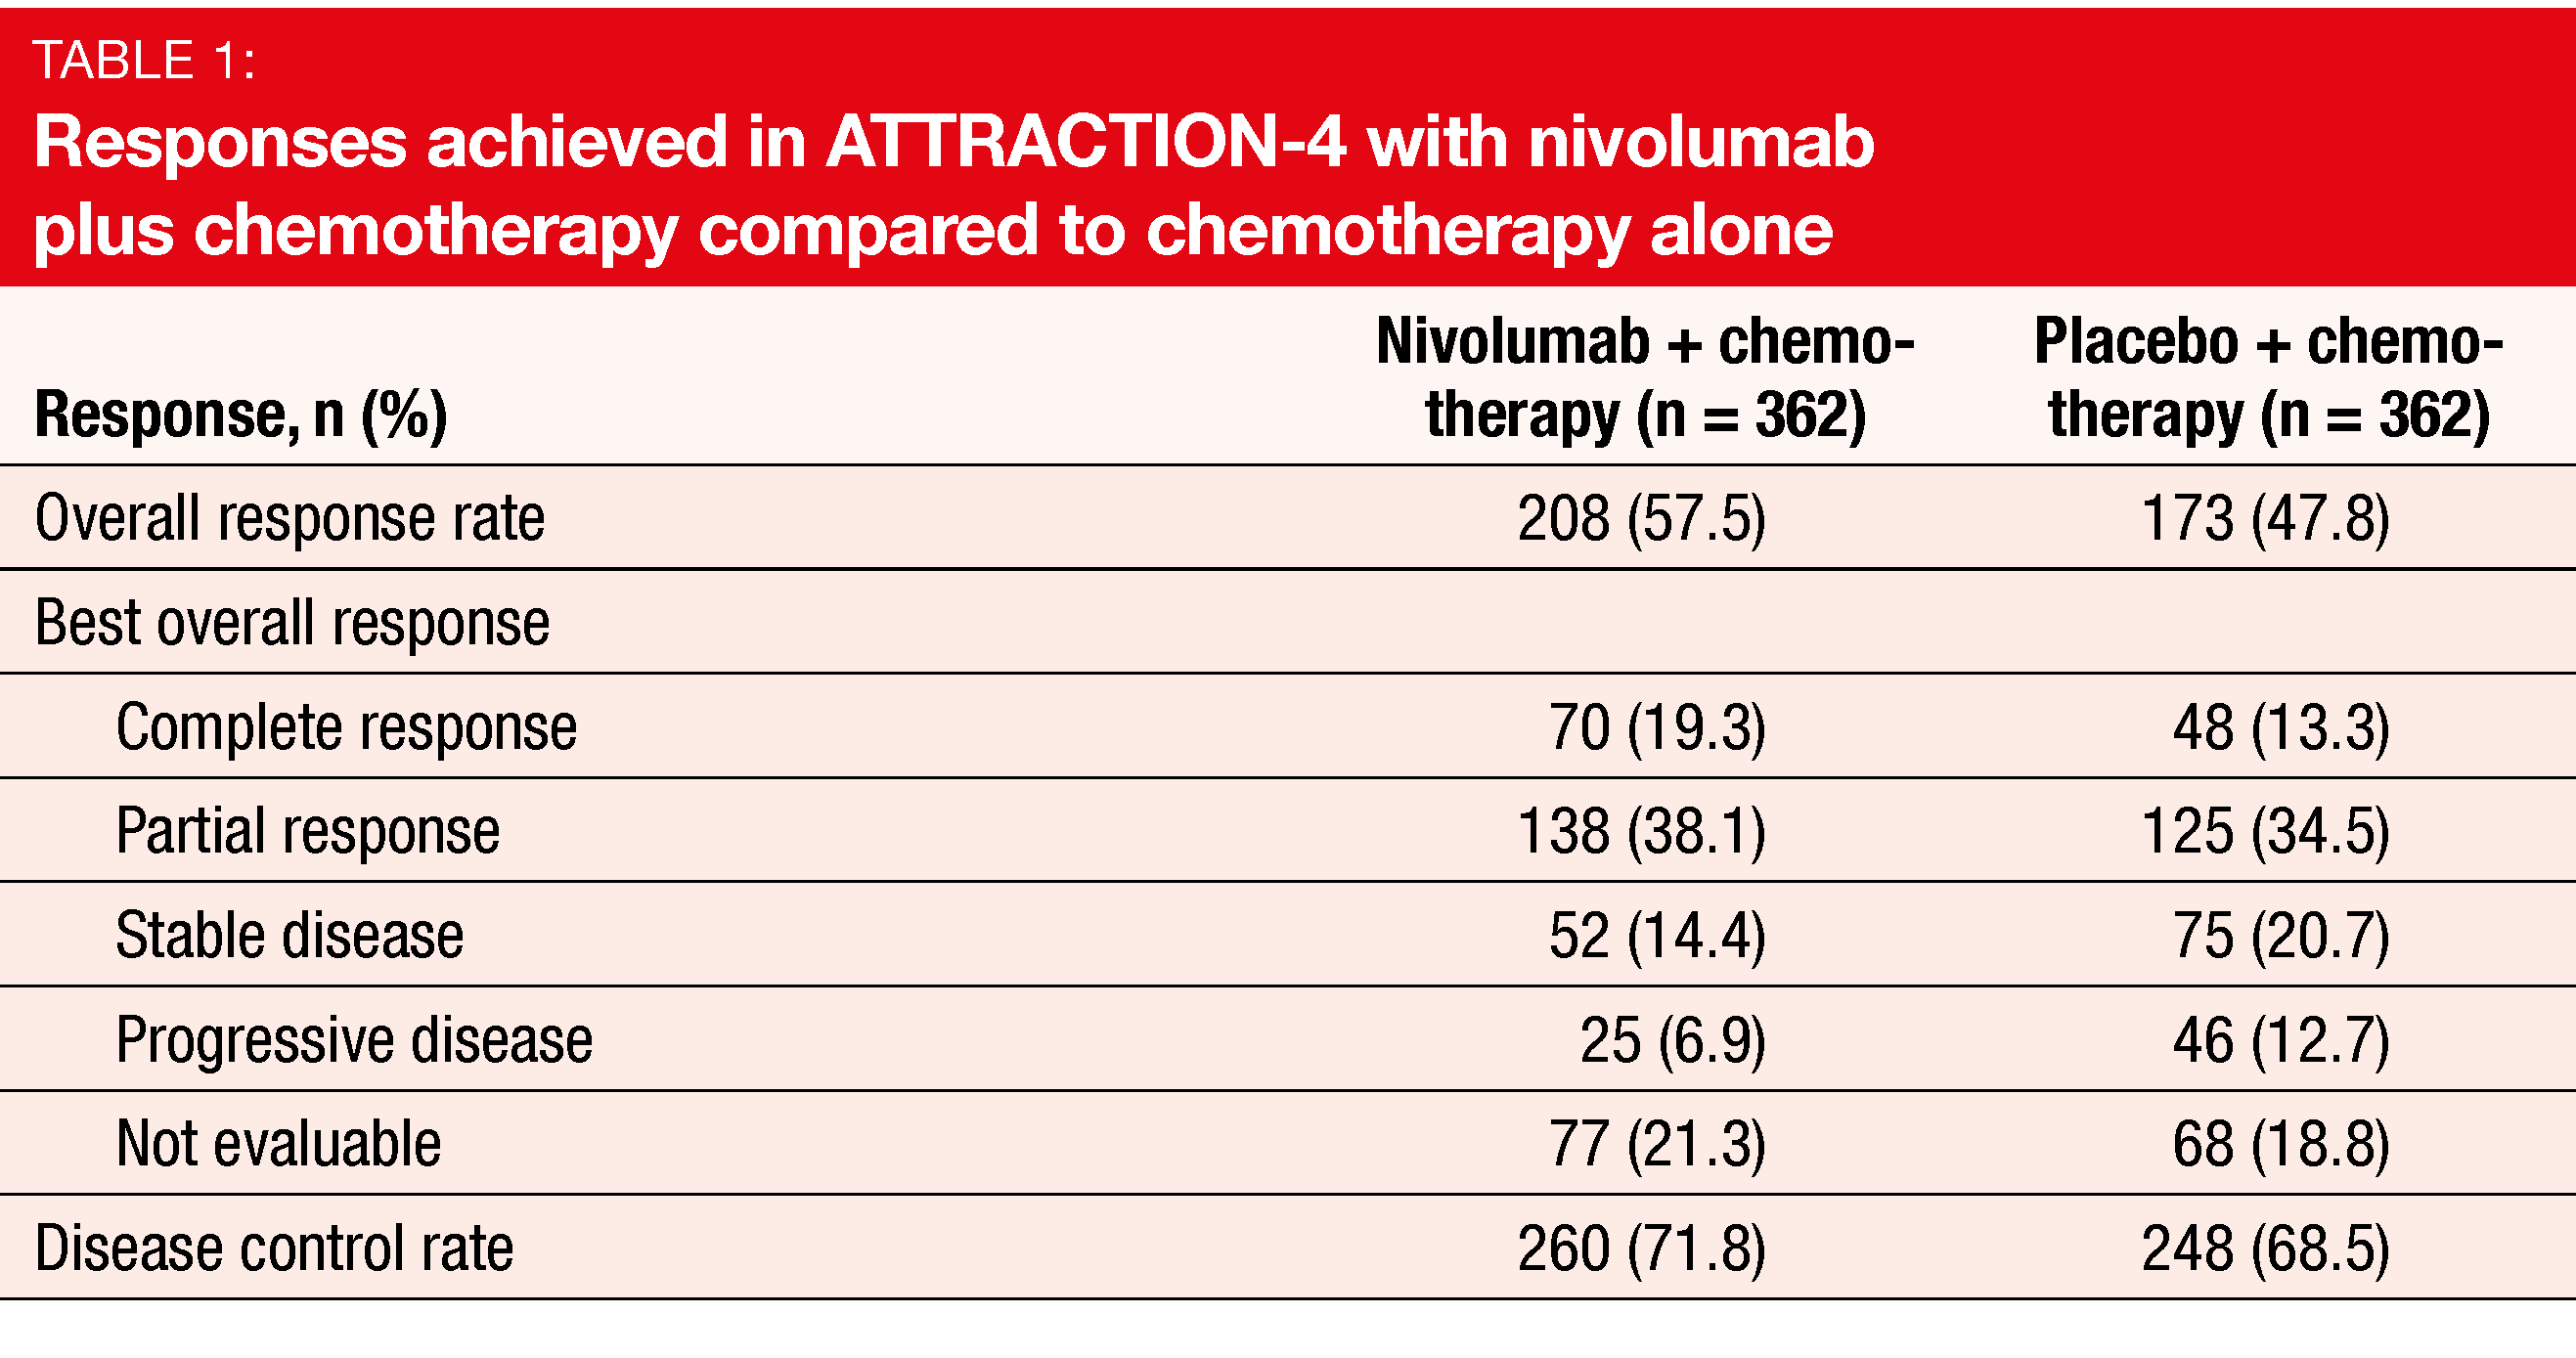 Table 1: Responses achieved in ATTRACTION-4 with nivolumab plus chemotherapy compared to chemotherapy alone